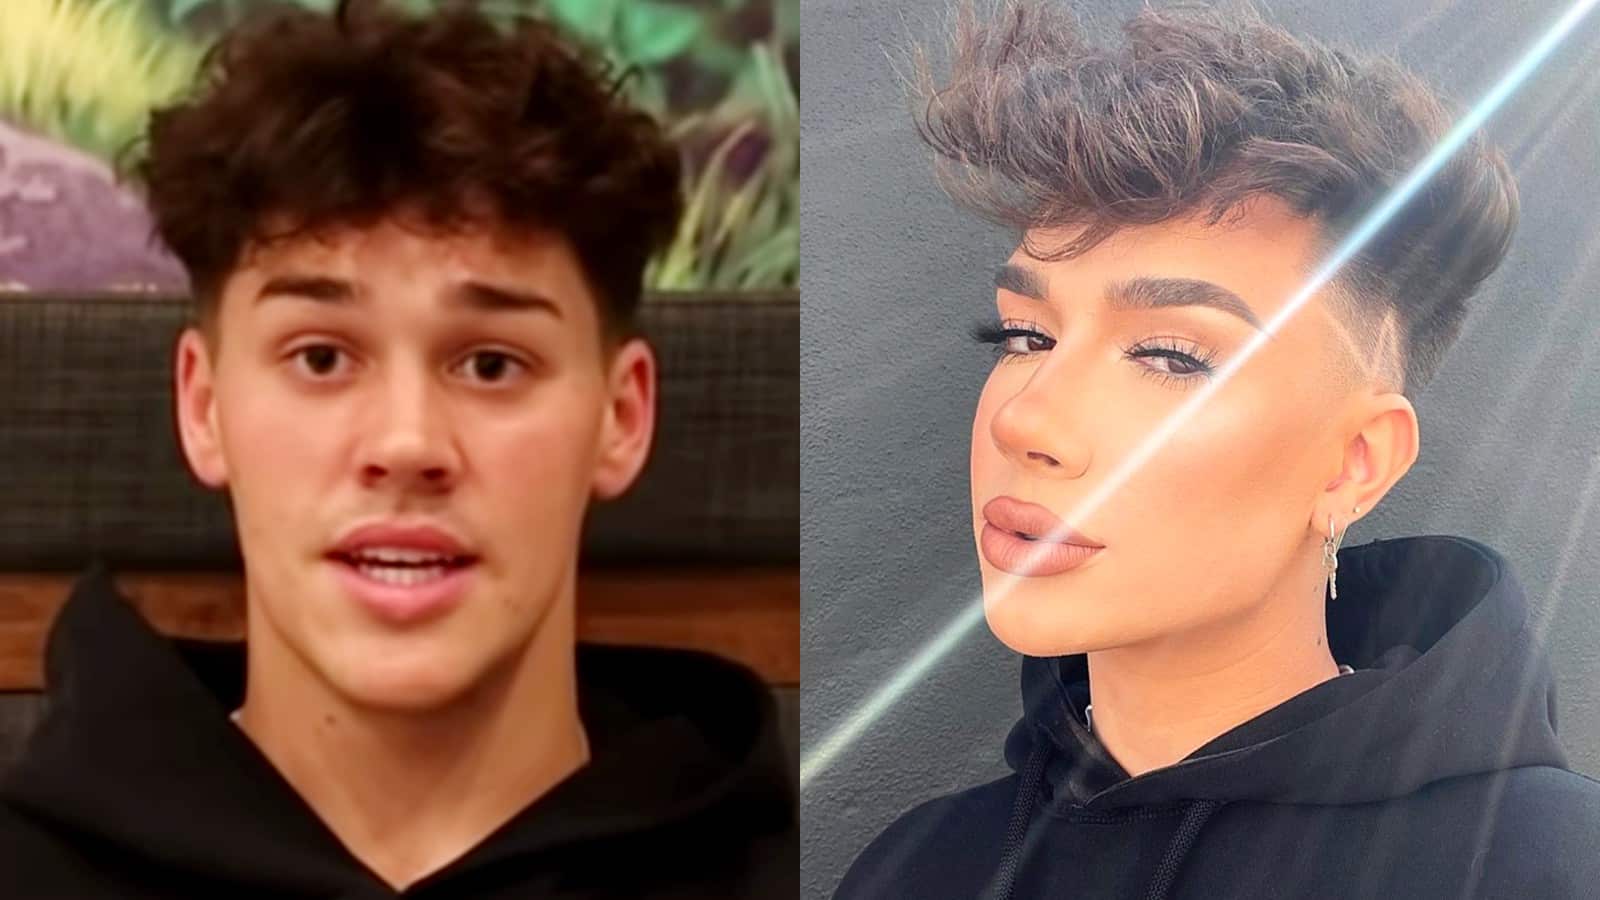 Noah Beck in a YouTube video next to Instagram photo of James Charles